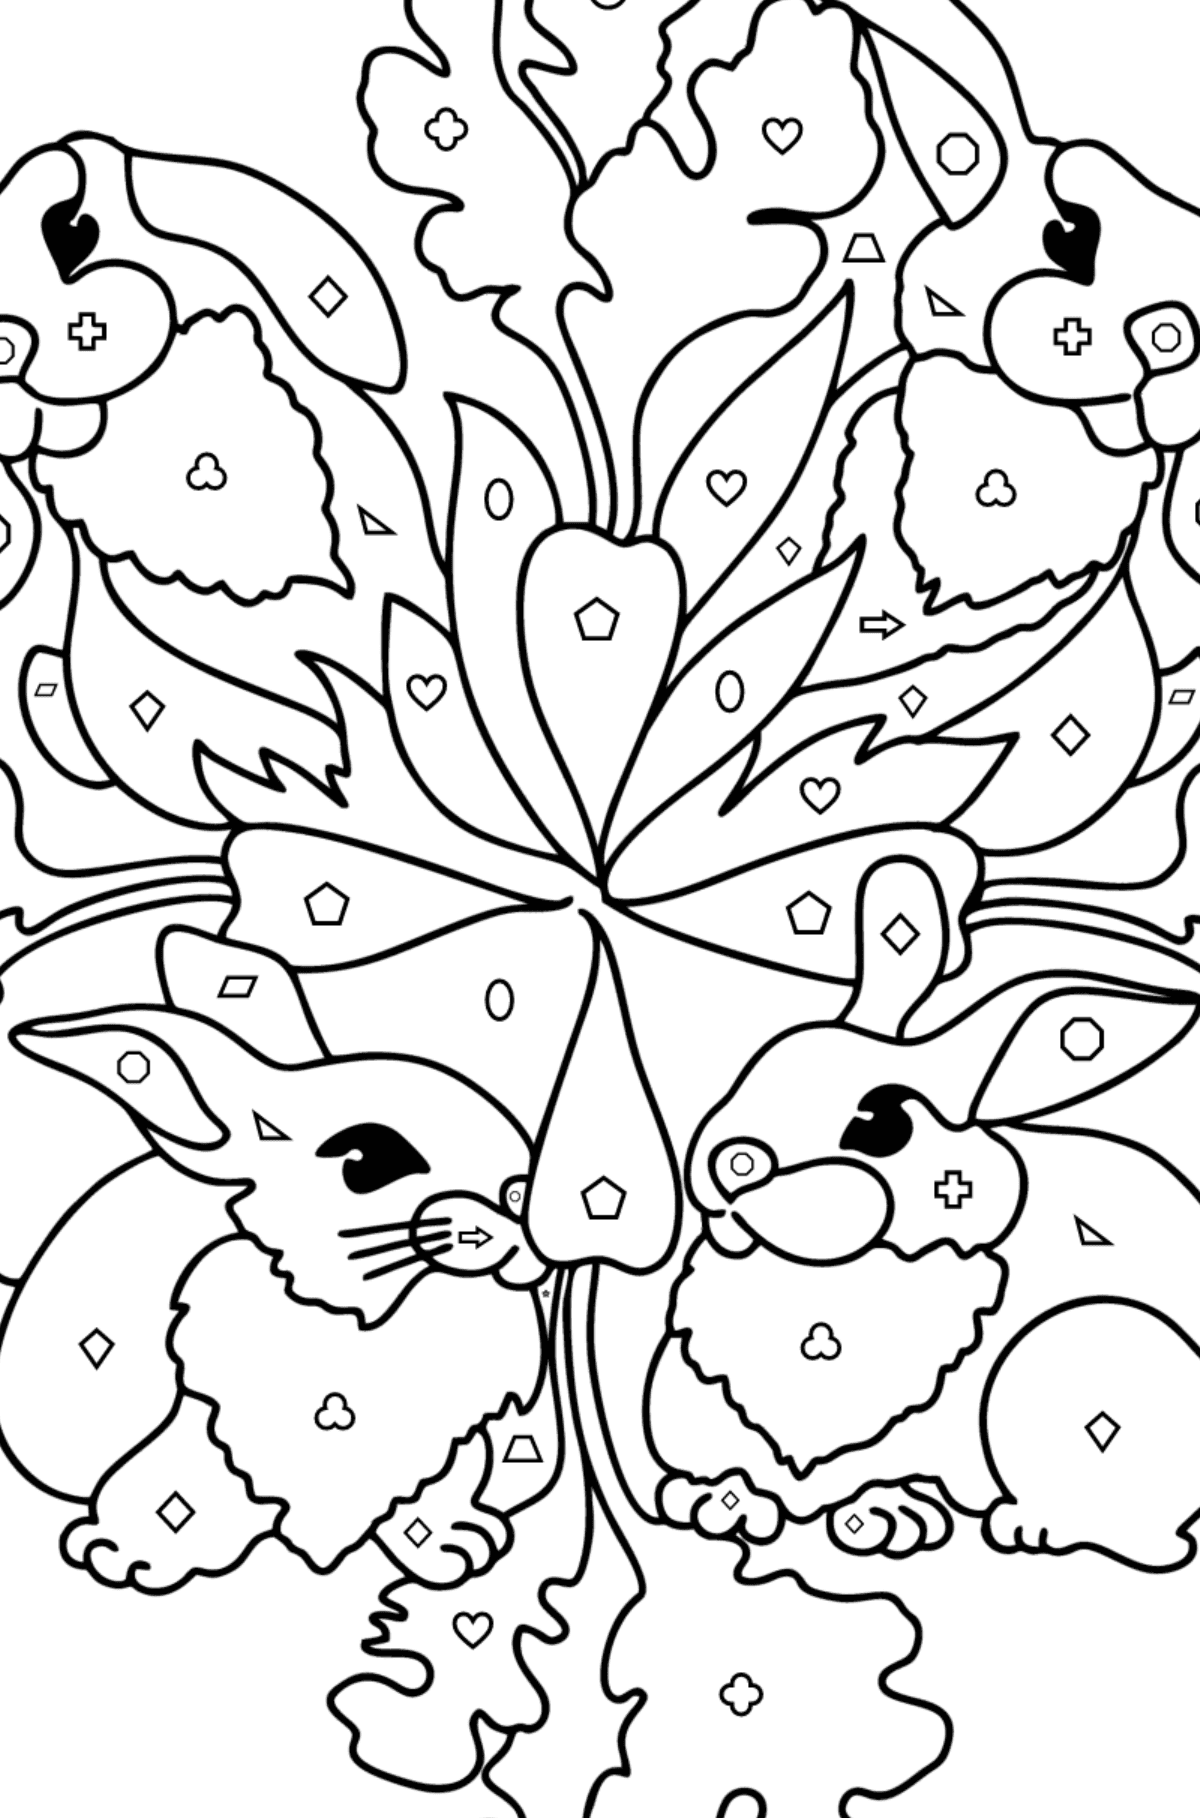 Mandala Bunny coloring page - Coloring by Geometric Shapes for Kids